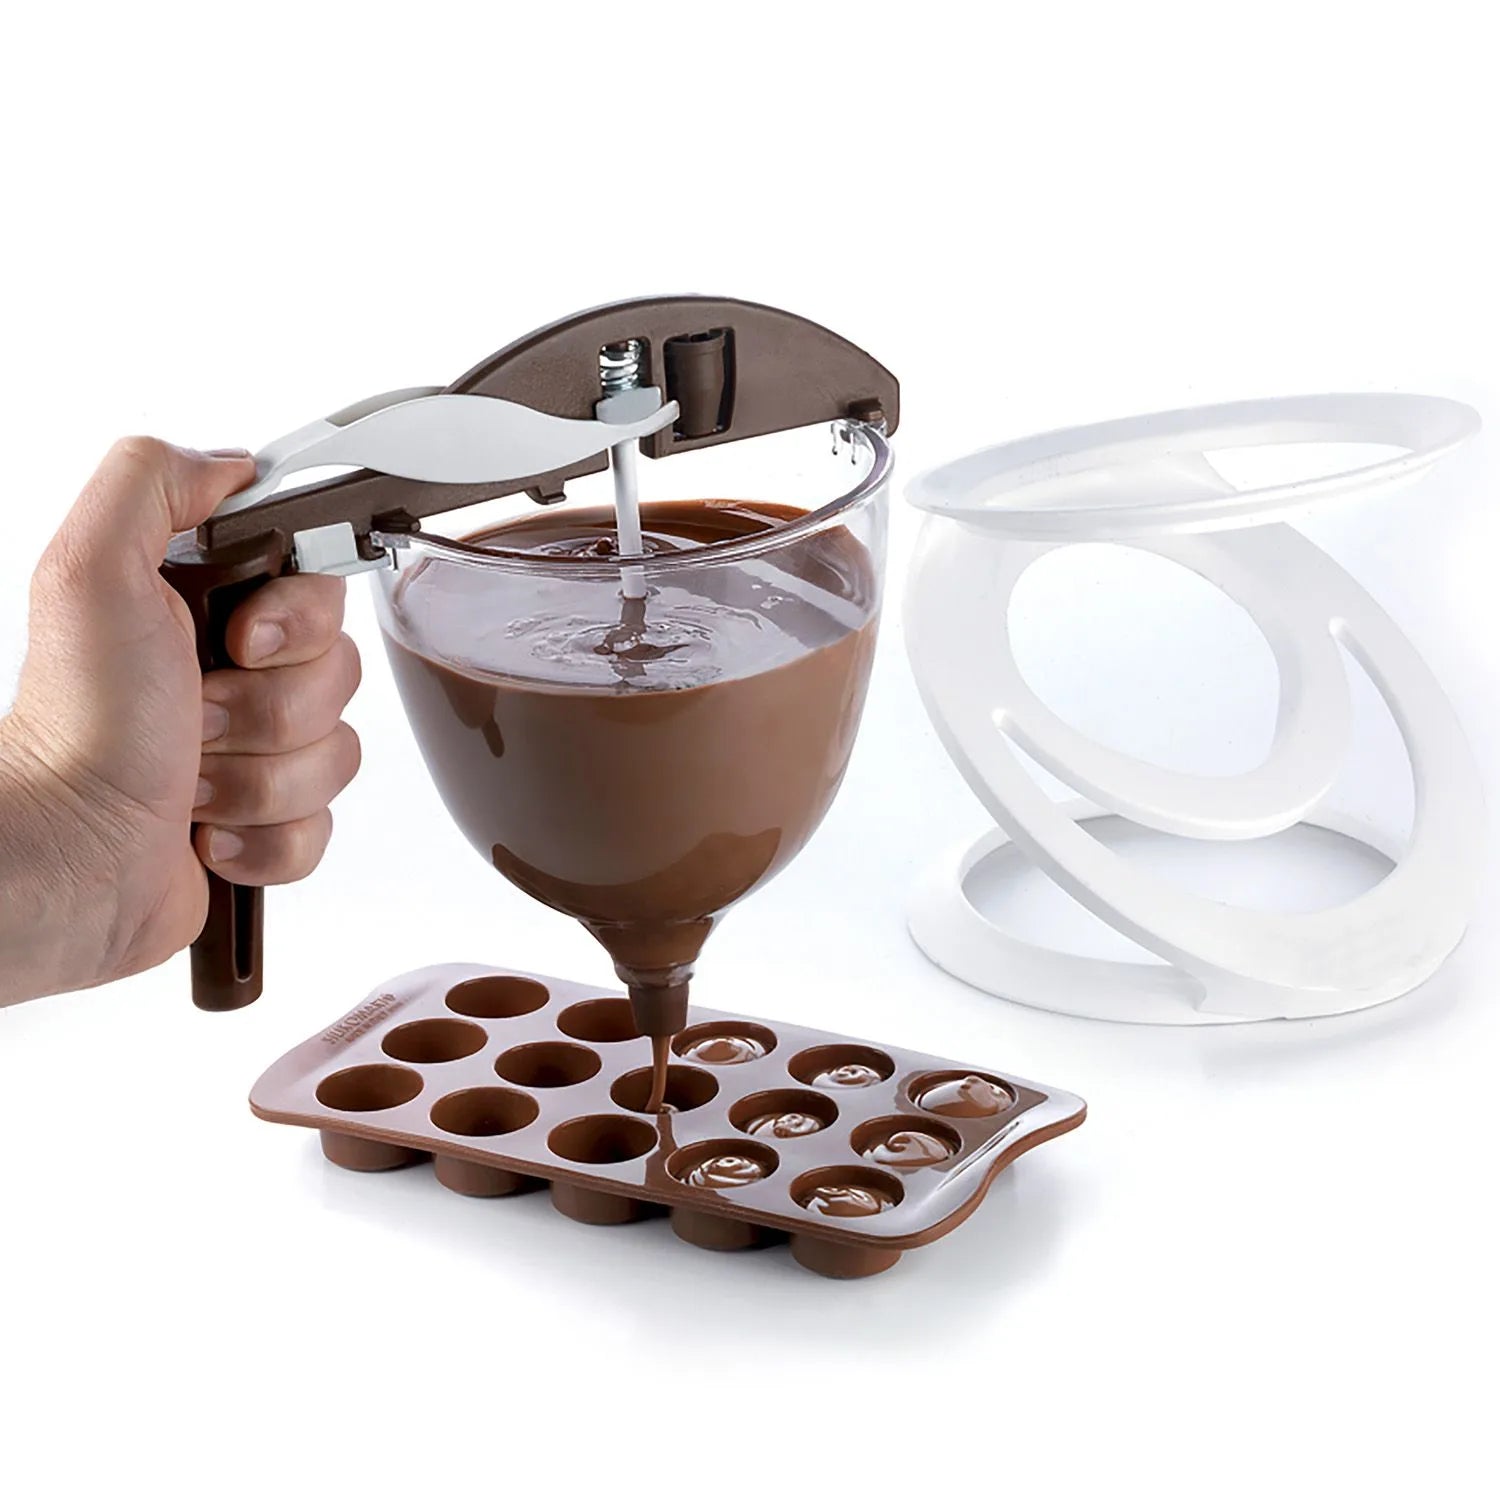 Funnel chocolate Set includes 1-funnel and stand